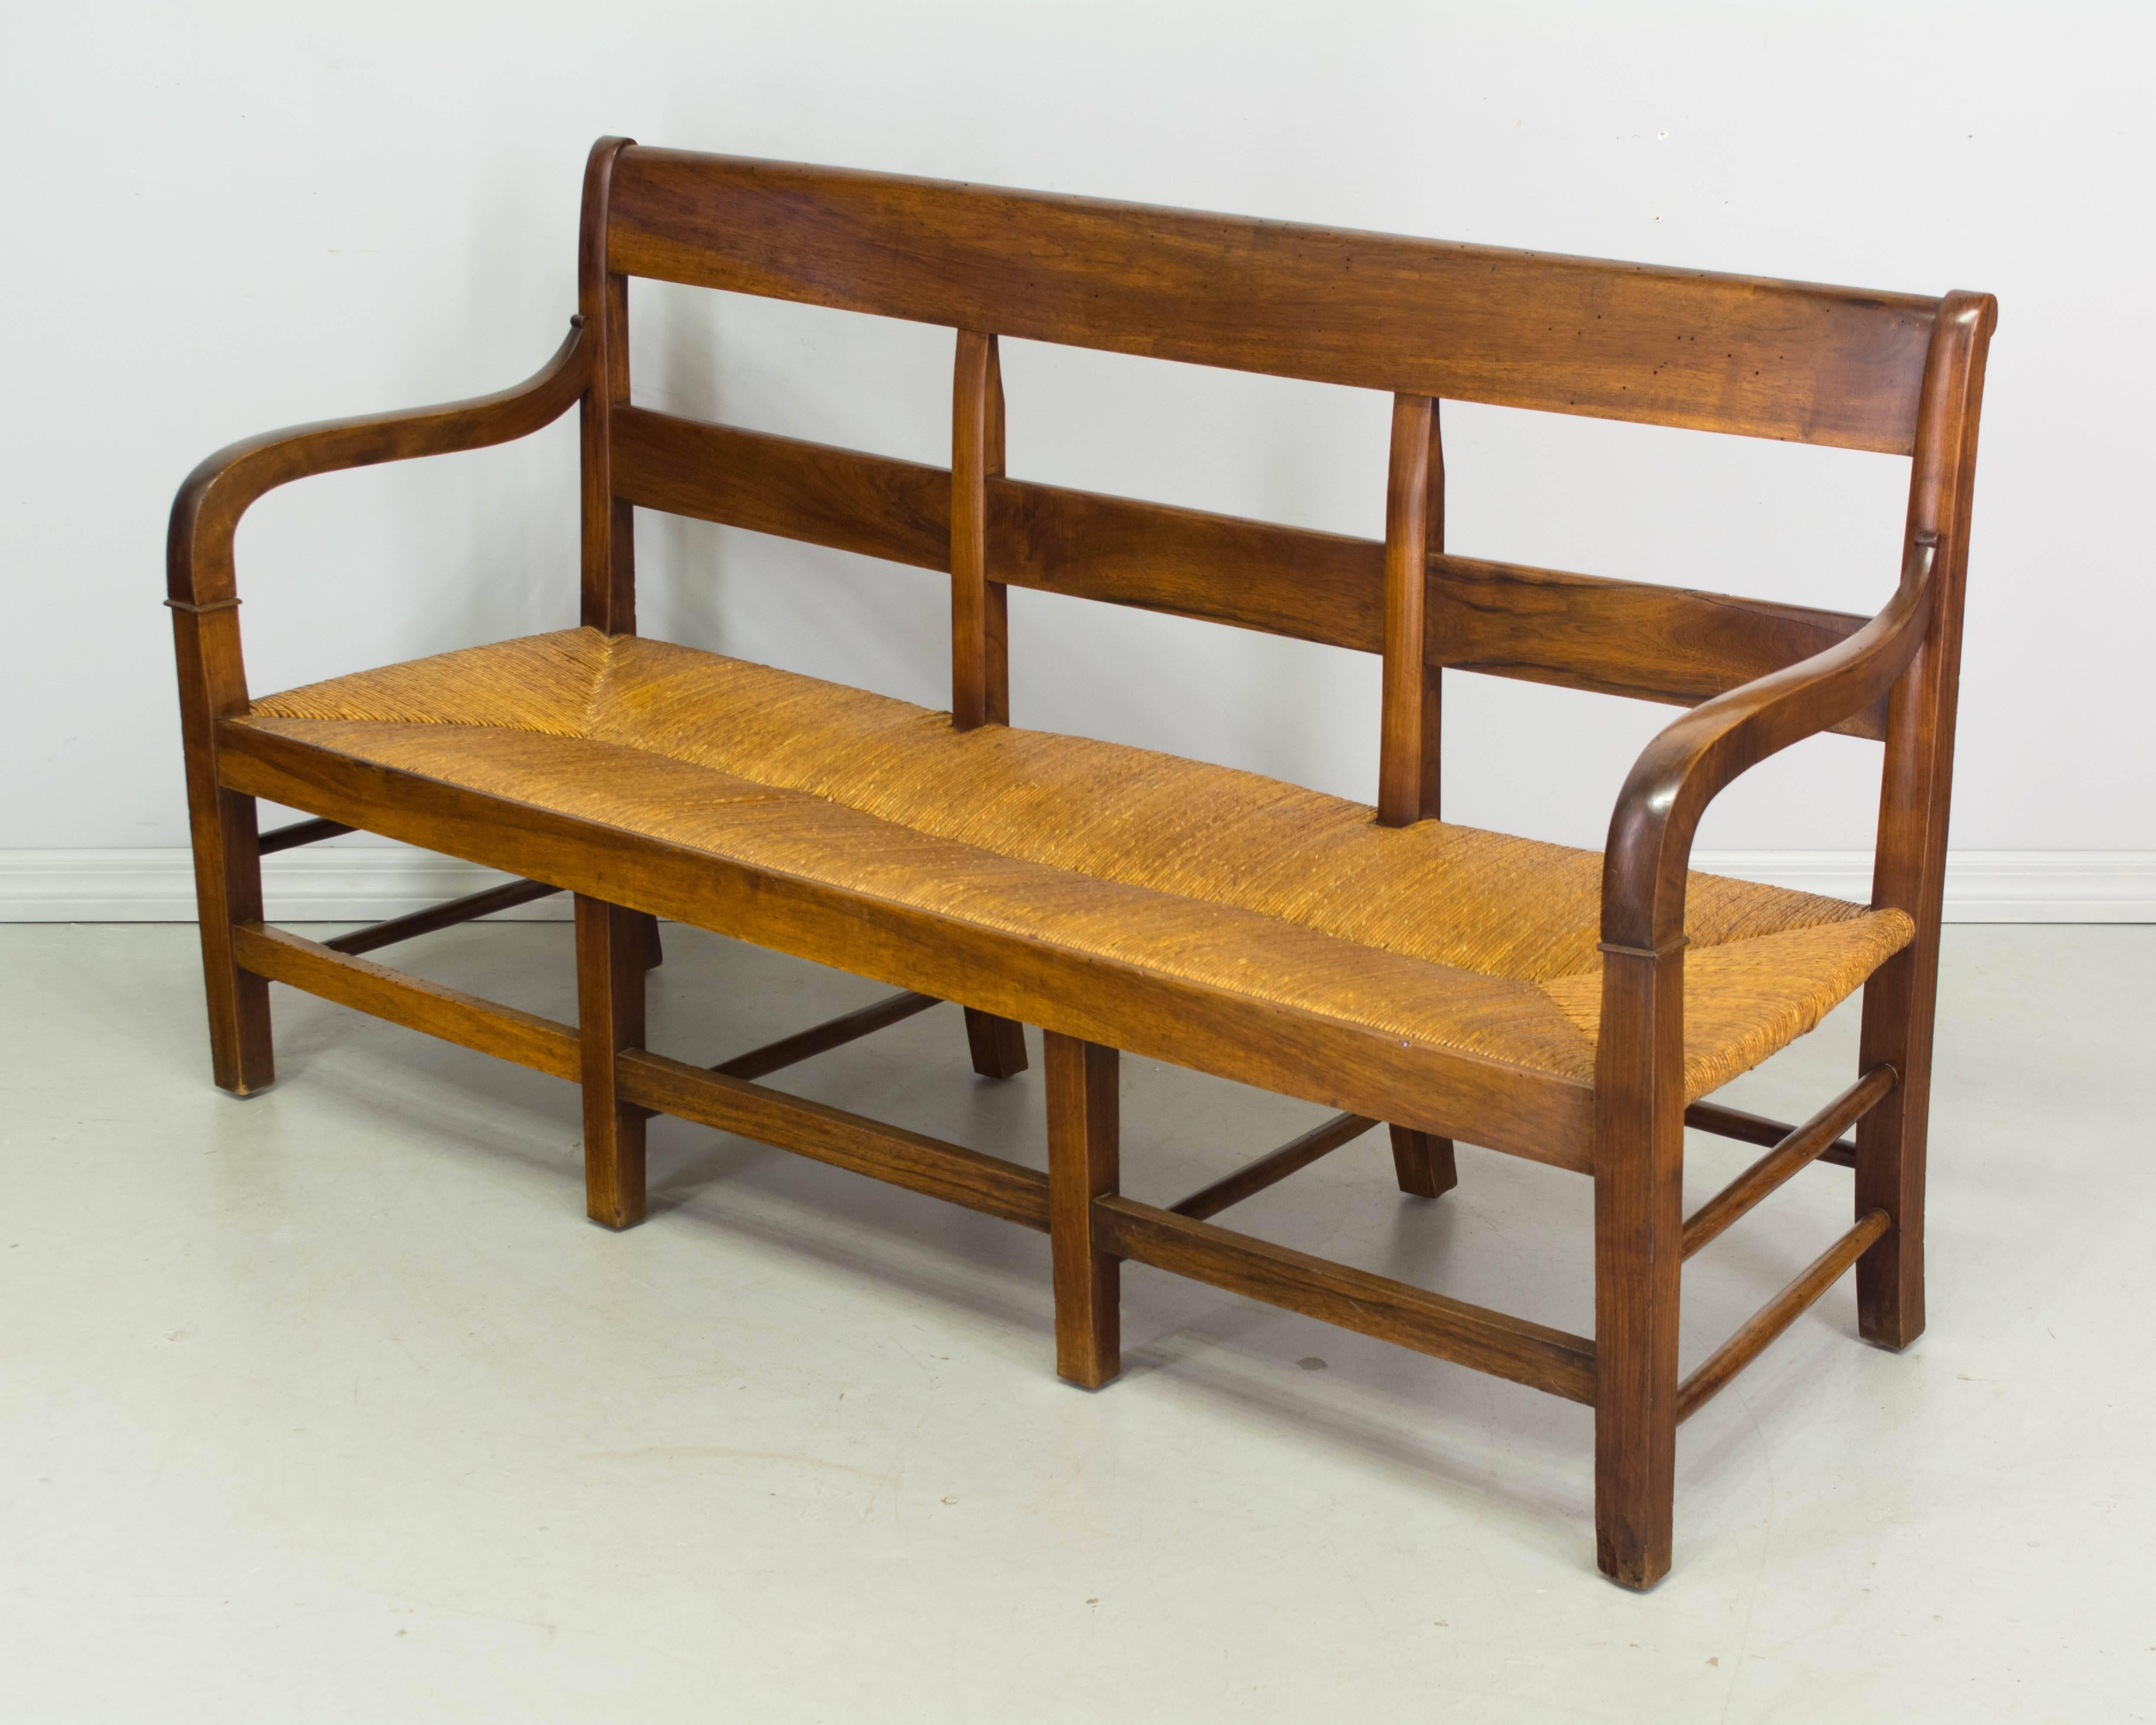 19th century Country French Provençal banquette made of solid walnut with pegged construction. Natural rush seat in excellent condition with old cushion covered in blue plaid linen. Beautiful wood grain with waxed patina. Very sturdy with nice